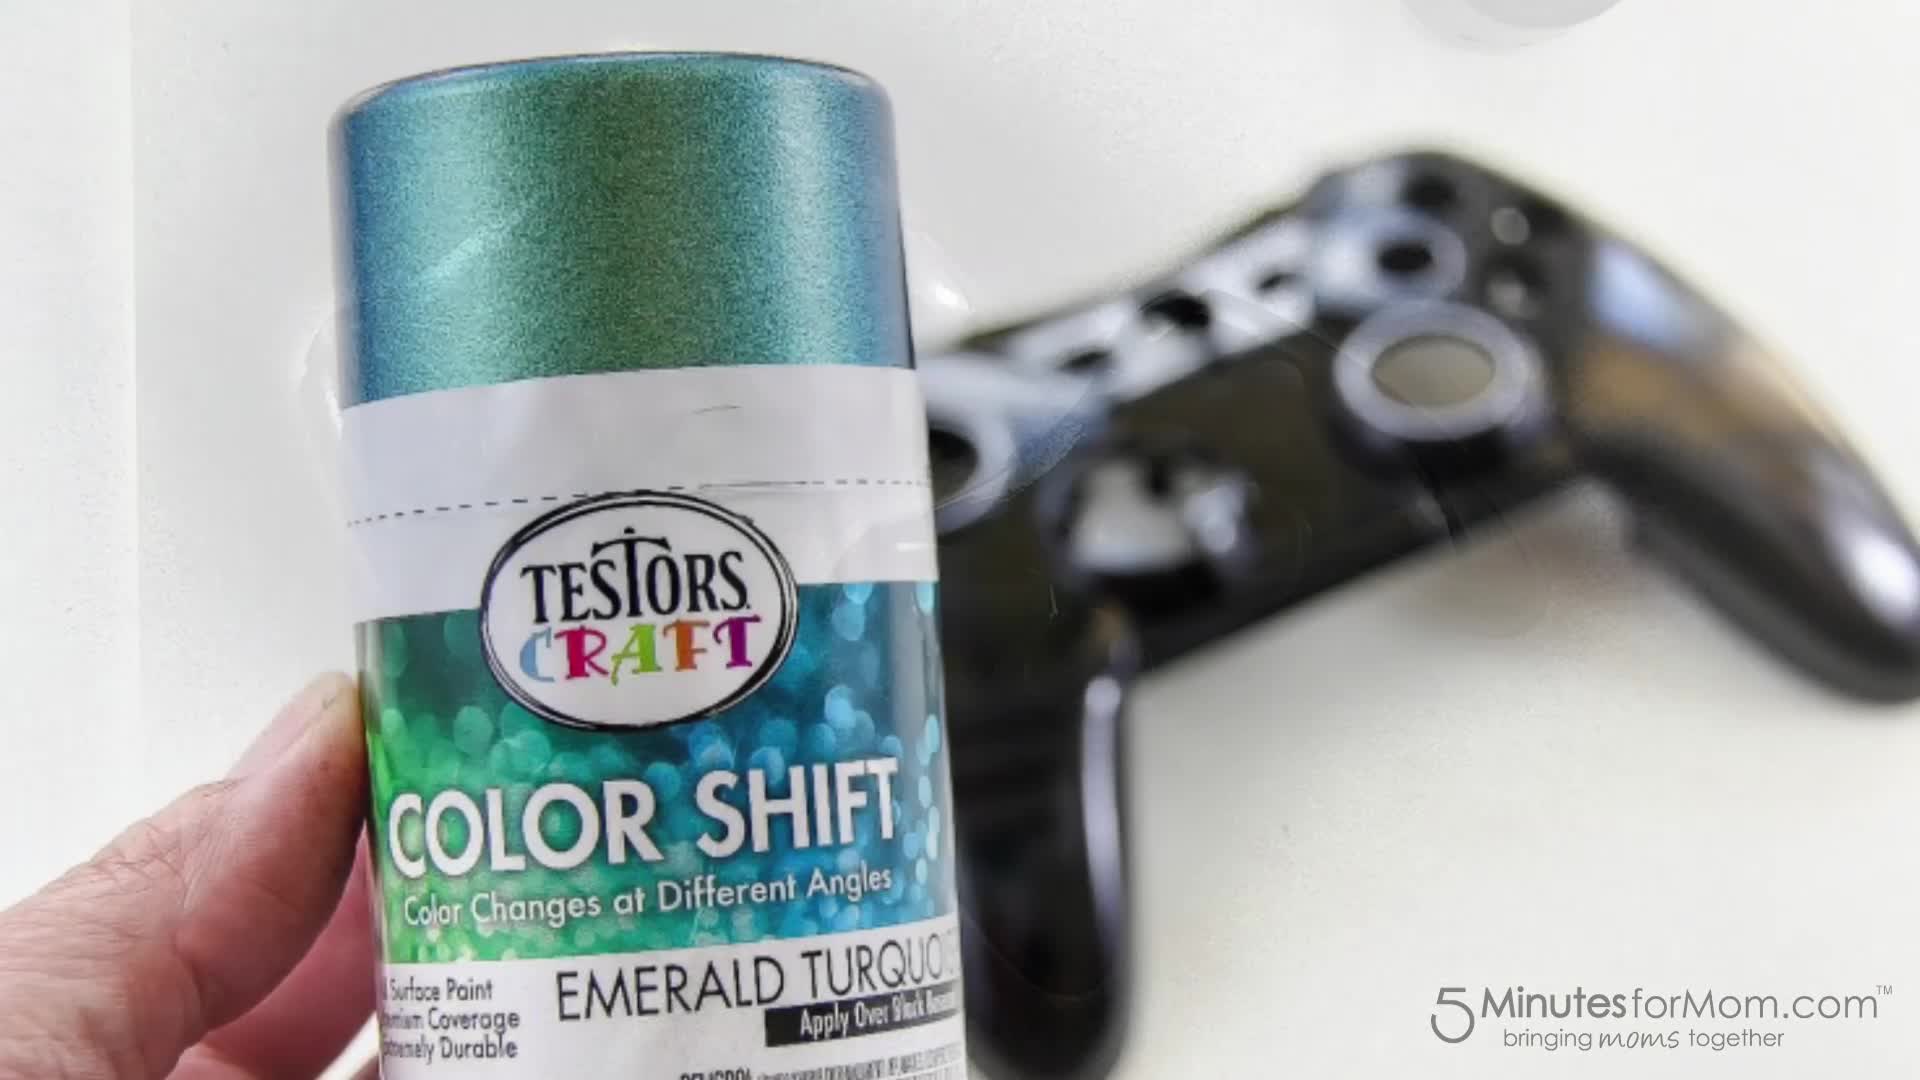 How to Paint Gaming Controllers - DIY Customized Video Game Controller